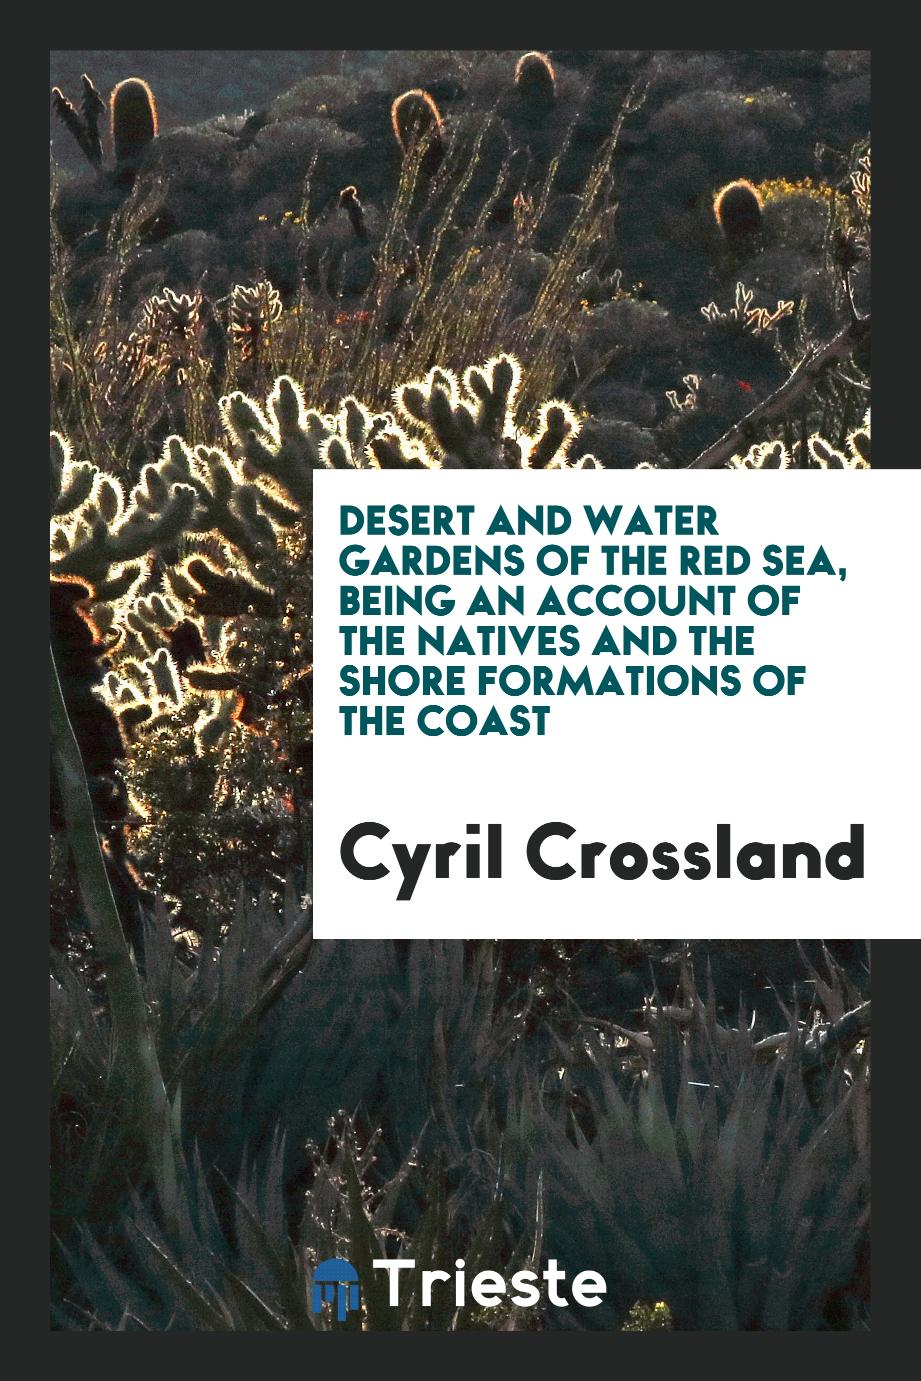 Desert and water gardens of the Red Sea, being an account of the natives and the shore formations of the coast